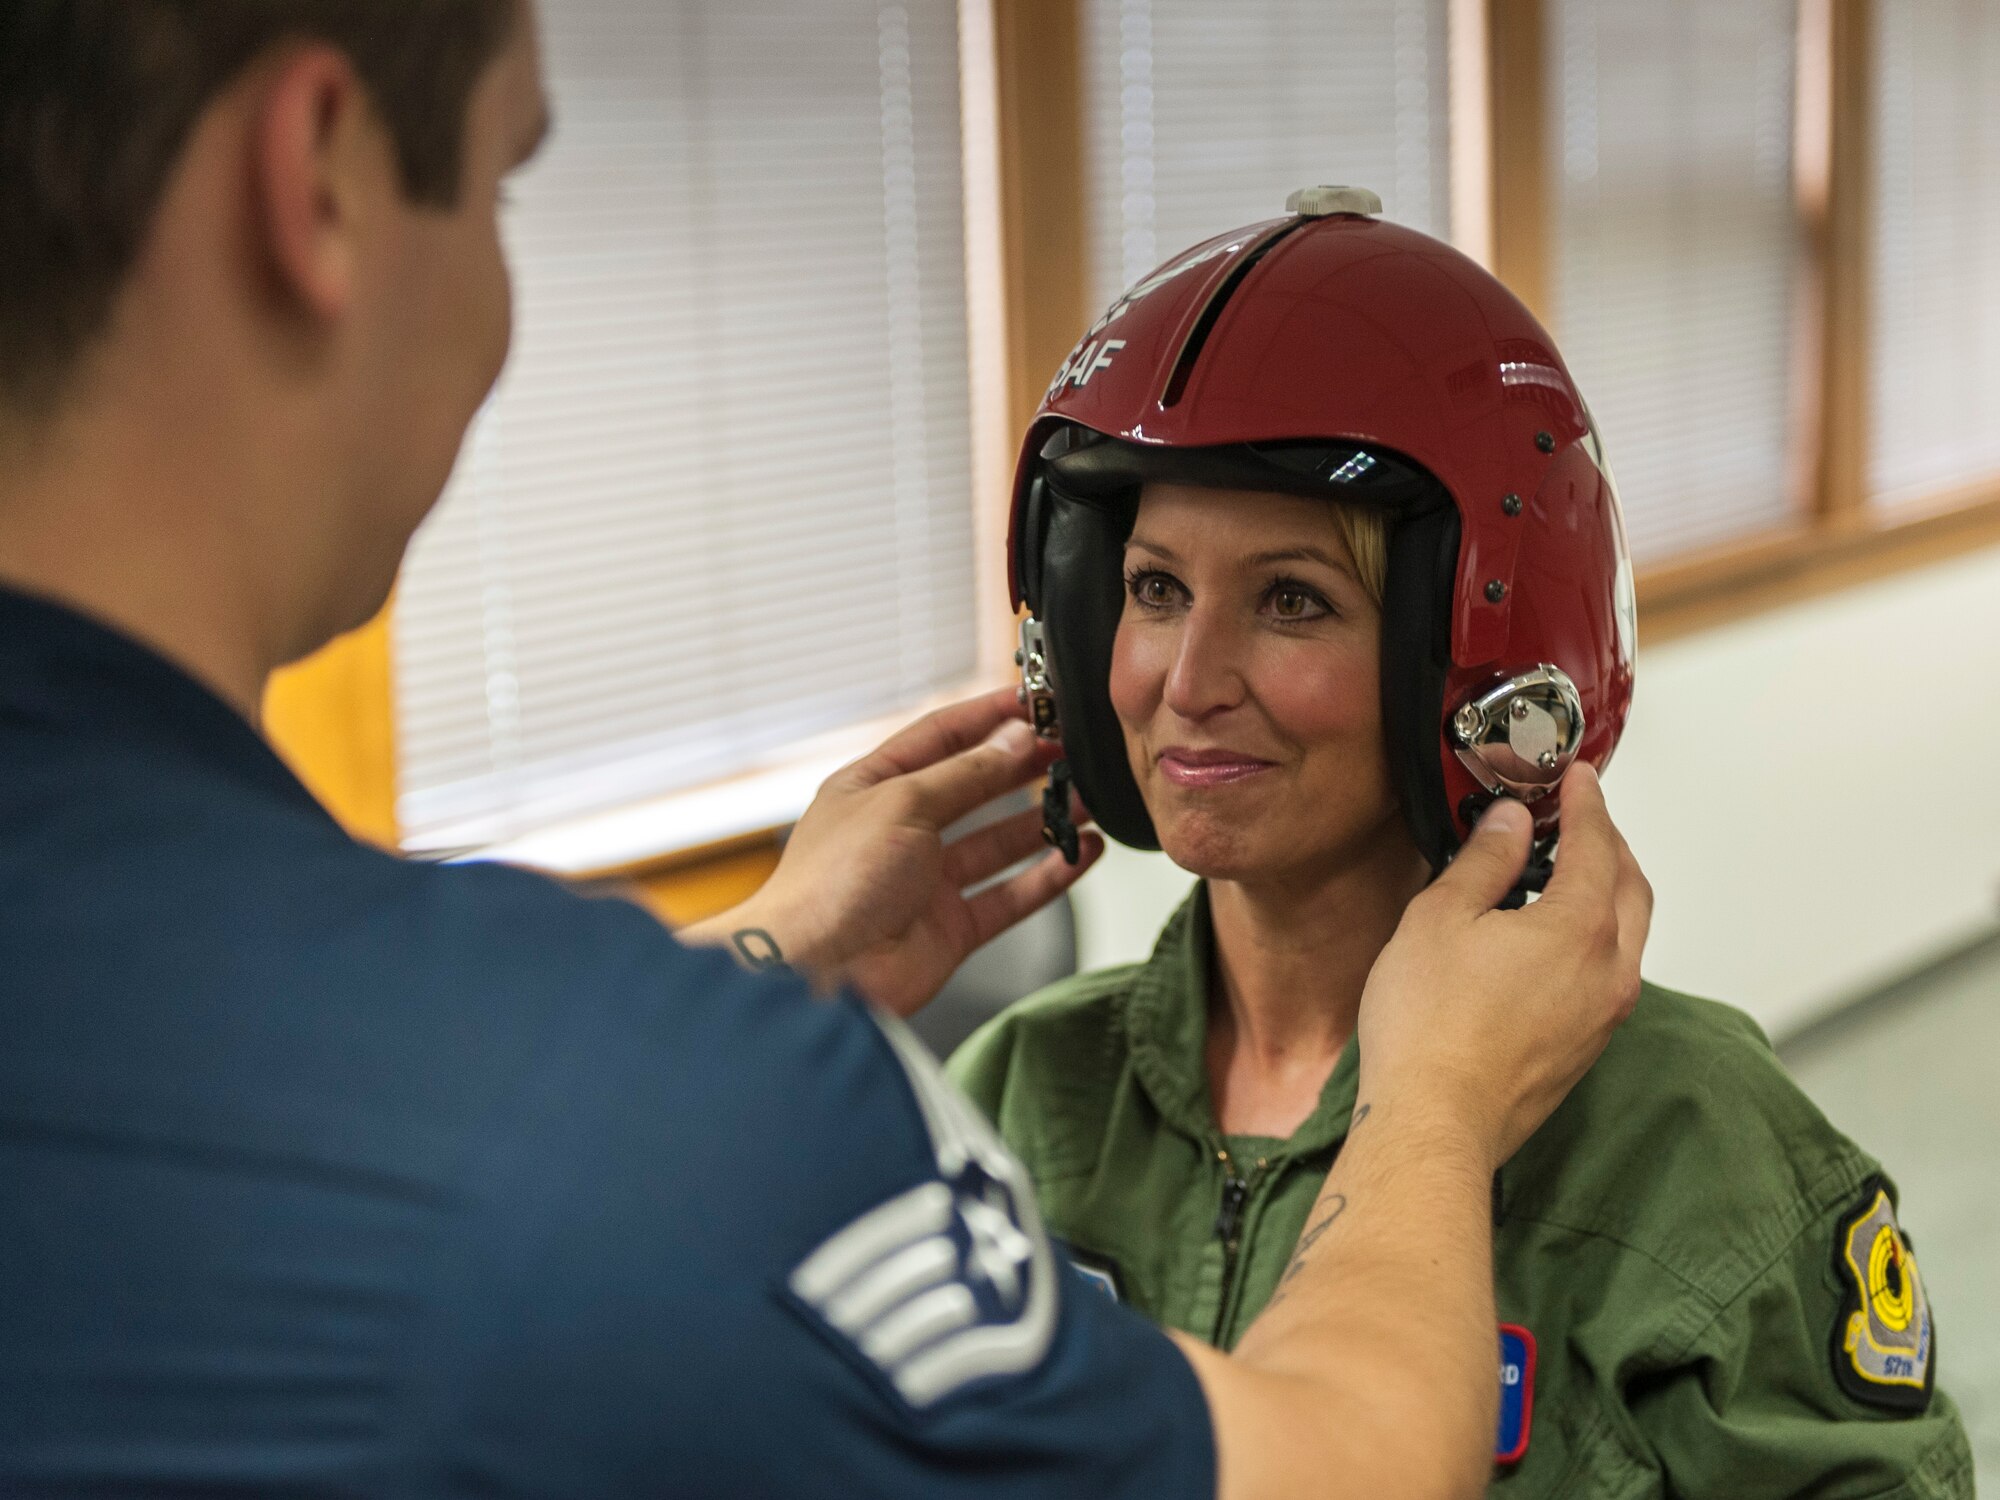 Staff Sgt. Jose Ibarra sizes Leslie Lowe for her helmet and mask in preparation for a U.S. Air Force Thunderbirds orientation flight as part of SkyFest 2014 at Fairchild Air Force Base, Wash., May 29, 2014. The Thunderbirds is an Air Combat Command unit composed of eight pilots, including six demonstration pilots, four support officers, three civilians and more than 130 enlisted personnel performing in 25 career fields. SkyFest is Fairchild’s air show and open house, giving the local and regional community the opportunity to view Airmen and our resources. Ibarra is a Thunderbirds aircrew flight equipment specialist here from Nellis AFB, Nev., and Lowe is a KHQ 6 reporter. (U.S. Air Force photo by Staff Sgt. Benjamin W. Stratton/Released)